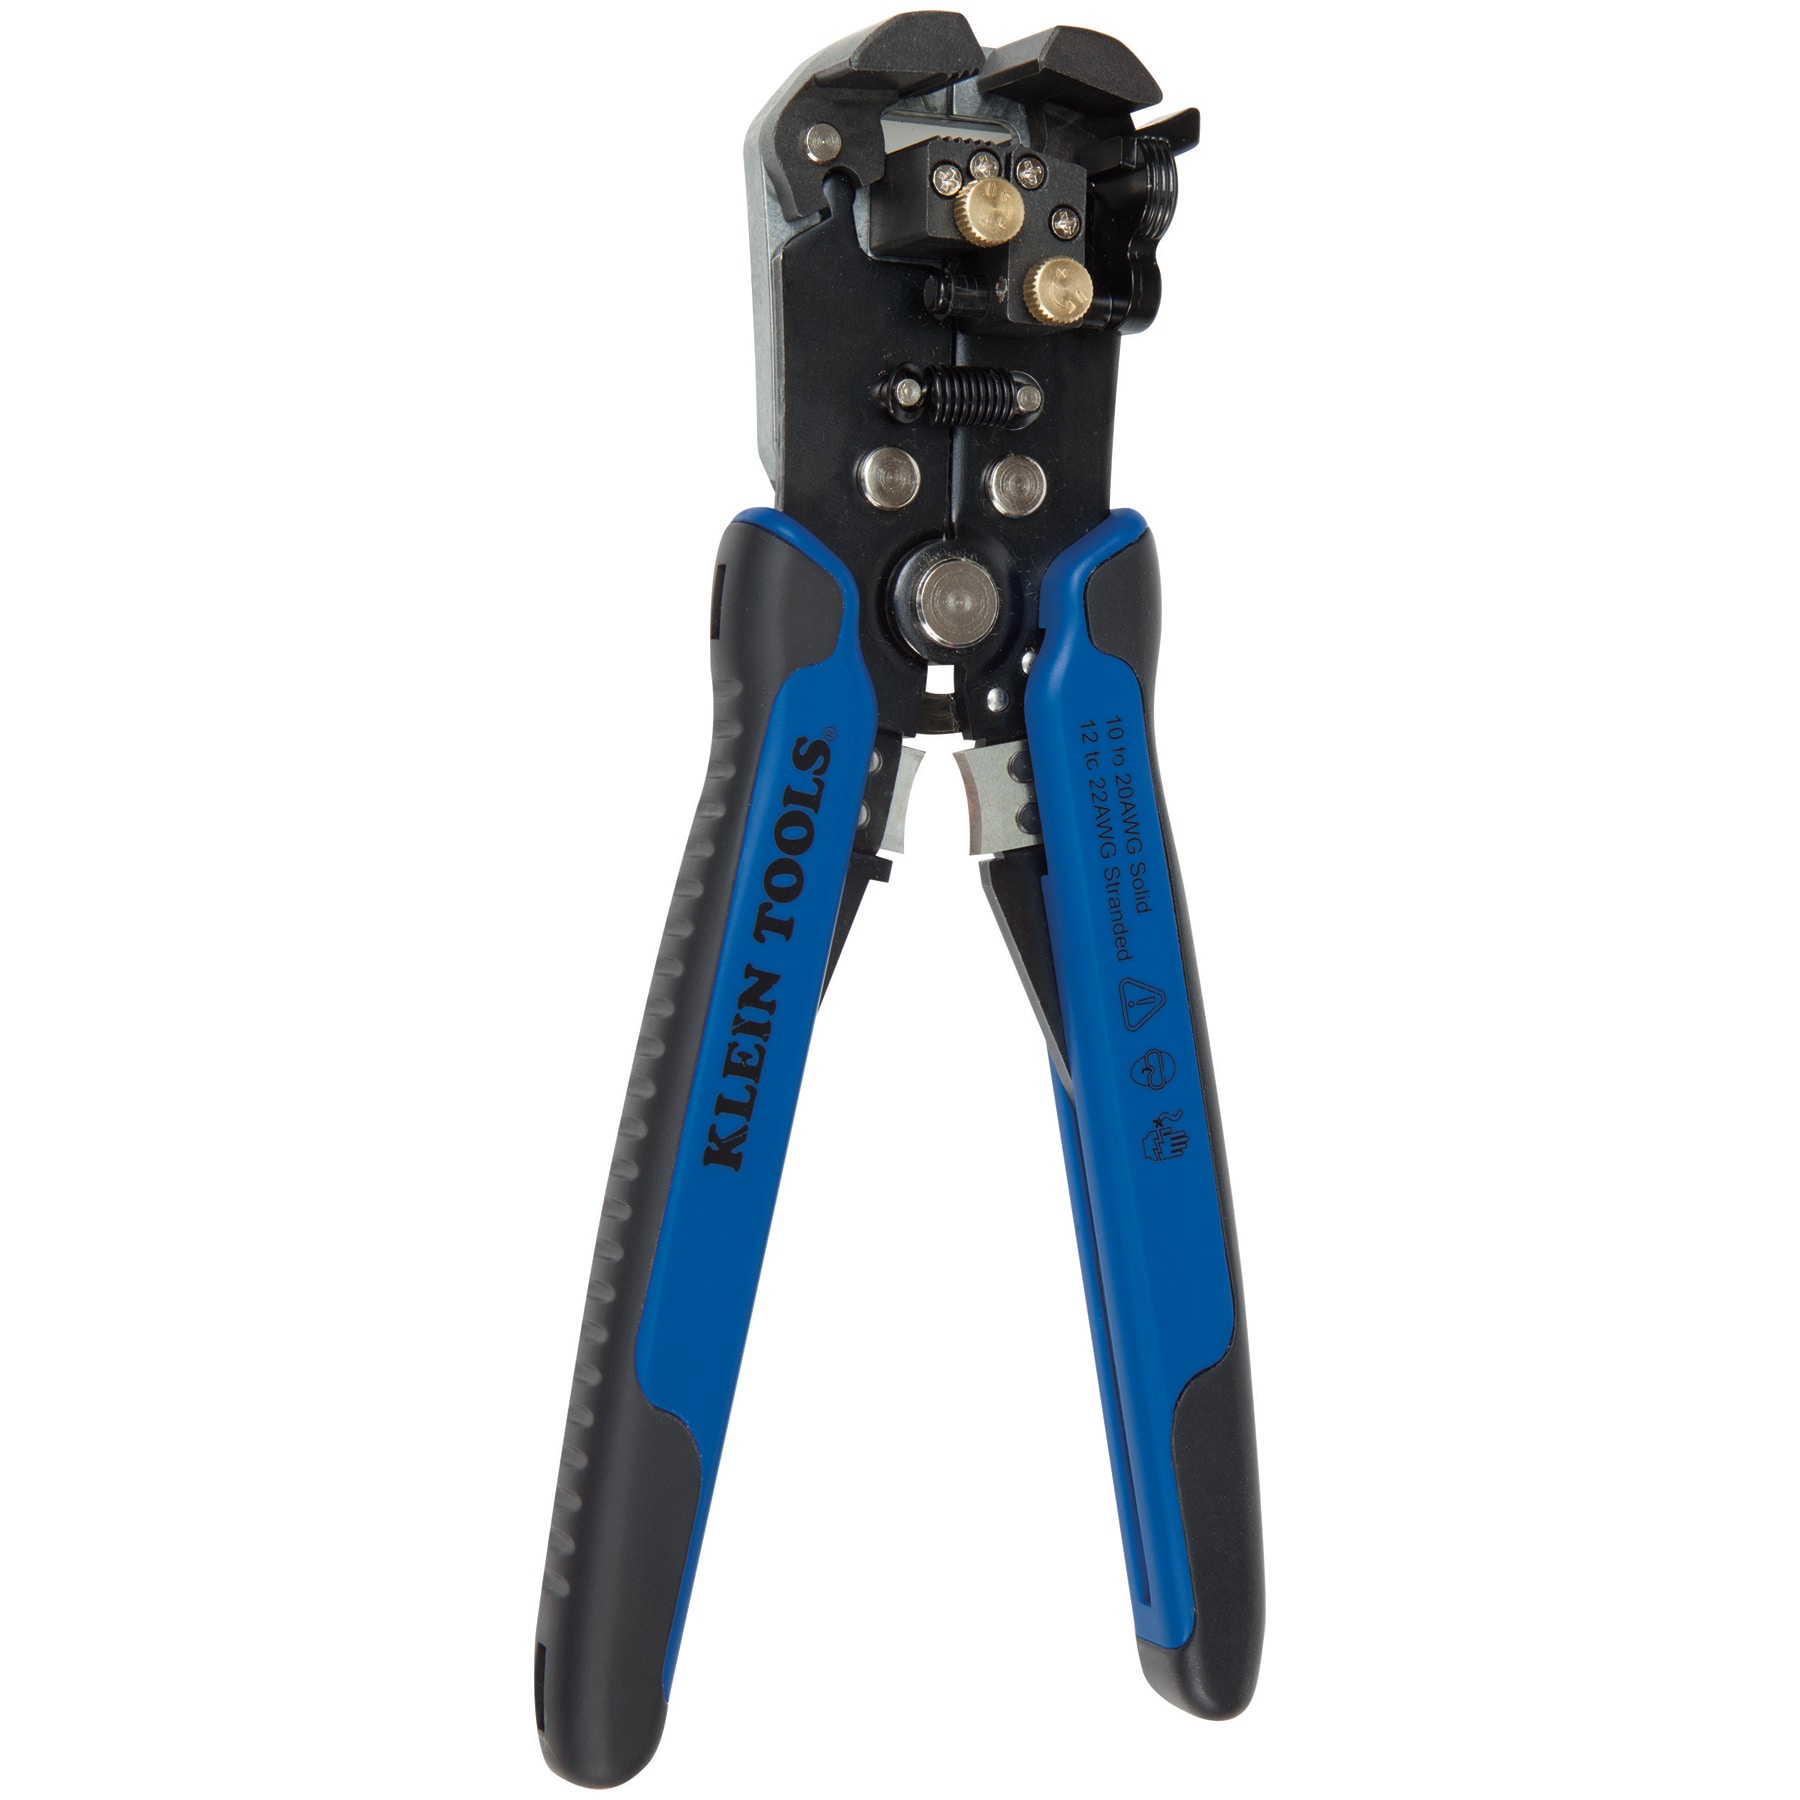 Wire Stripper, Multifunctional Wire Strippers Electrical with Cuts 8 10 12  14 16 18 20 22 AWG Cutter Pliers Splitter Winding Wires Cable Crimper